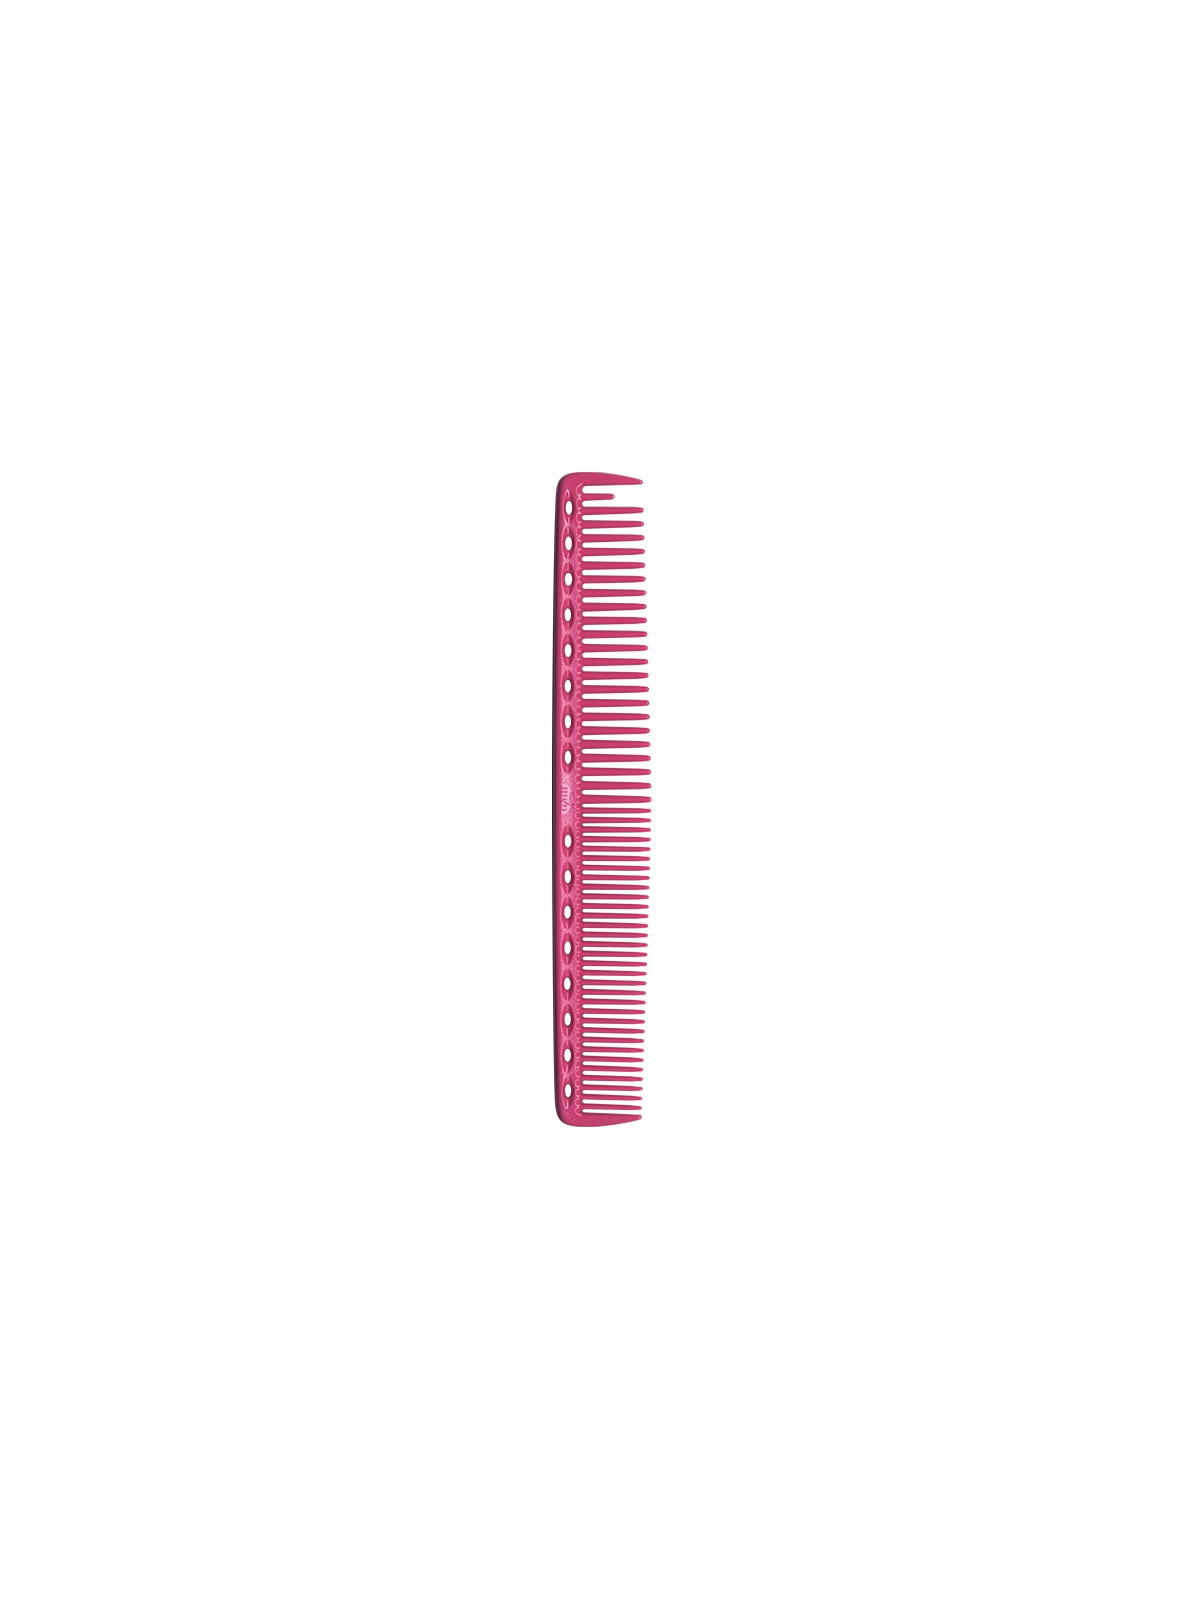 Y.S. Park 337 Round Tooth Cutting Comb 190mm